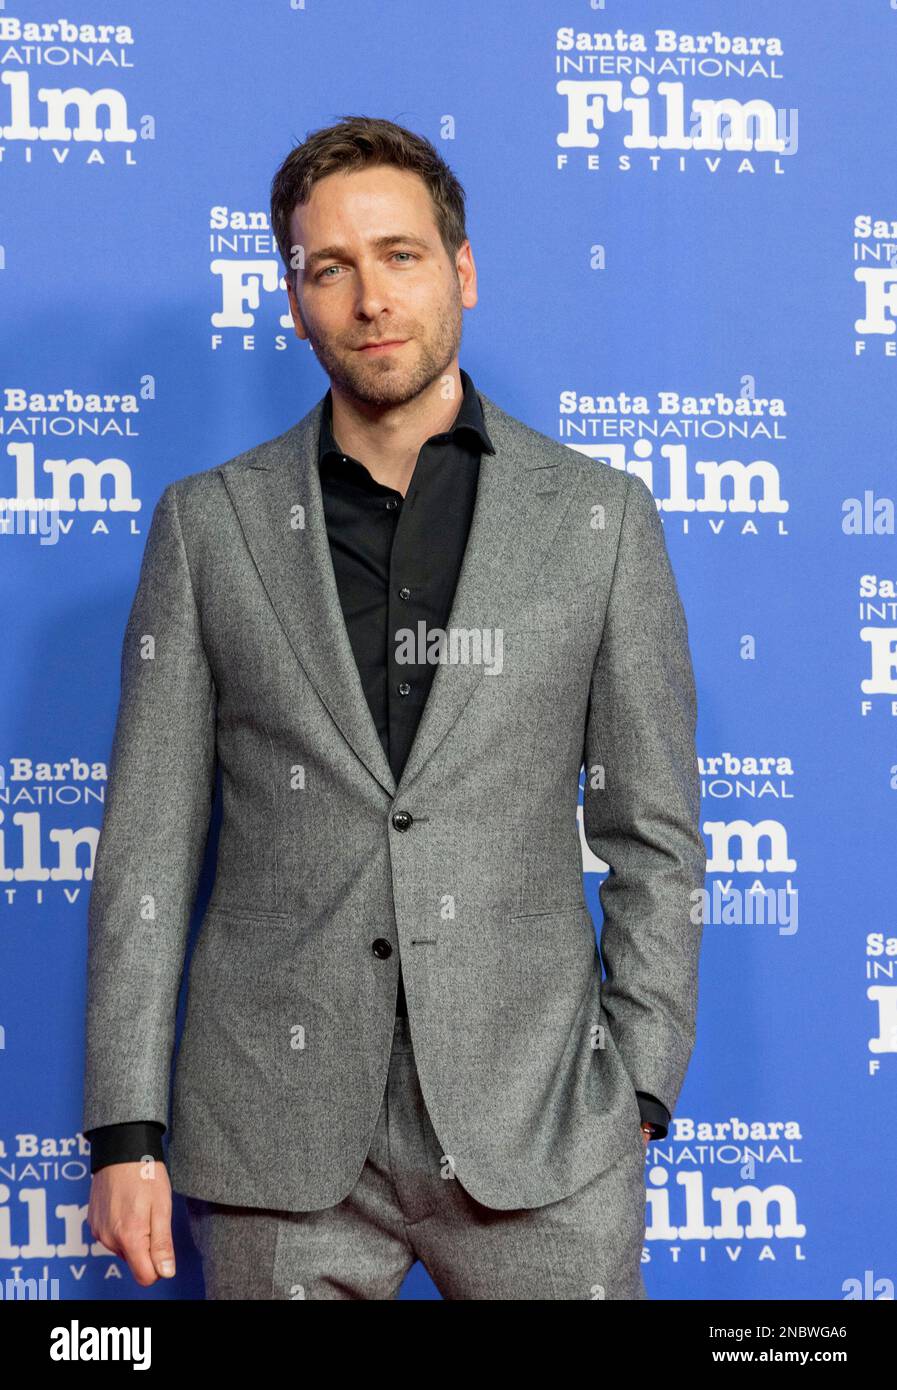 Paul Rogers – Editing (Everything Everywhere All at Once) arrives at the 2023 Santa Barbara International Film Festival red carpet event in receiving the Variety Artisans Award at the Arlington Theatre on February 13, 2023 in Santa Barbara, CA. (Photo by Rod Rolle/Sipa USA) Stock Photo